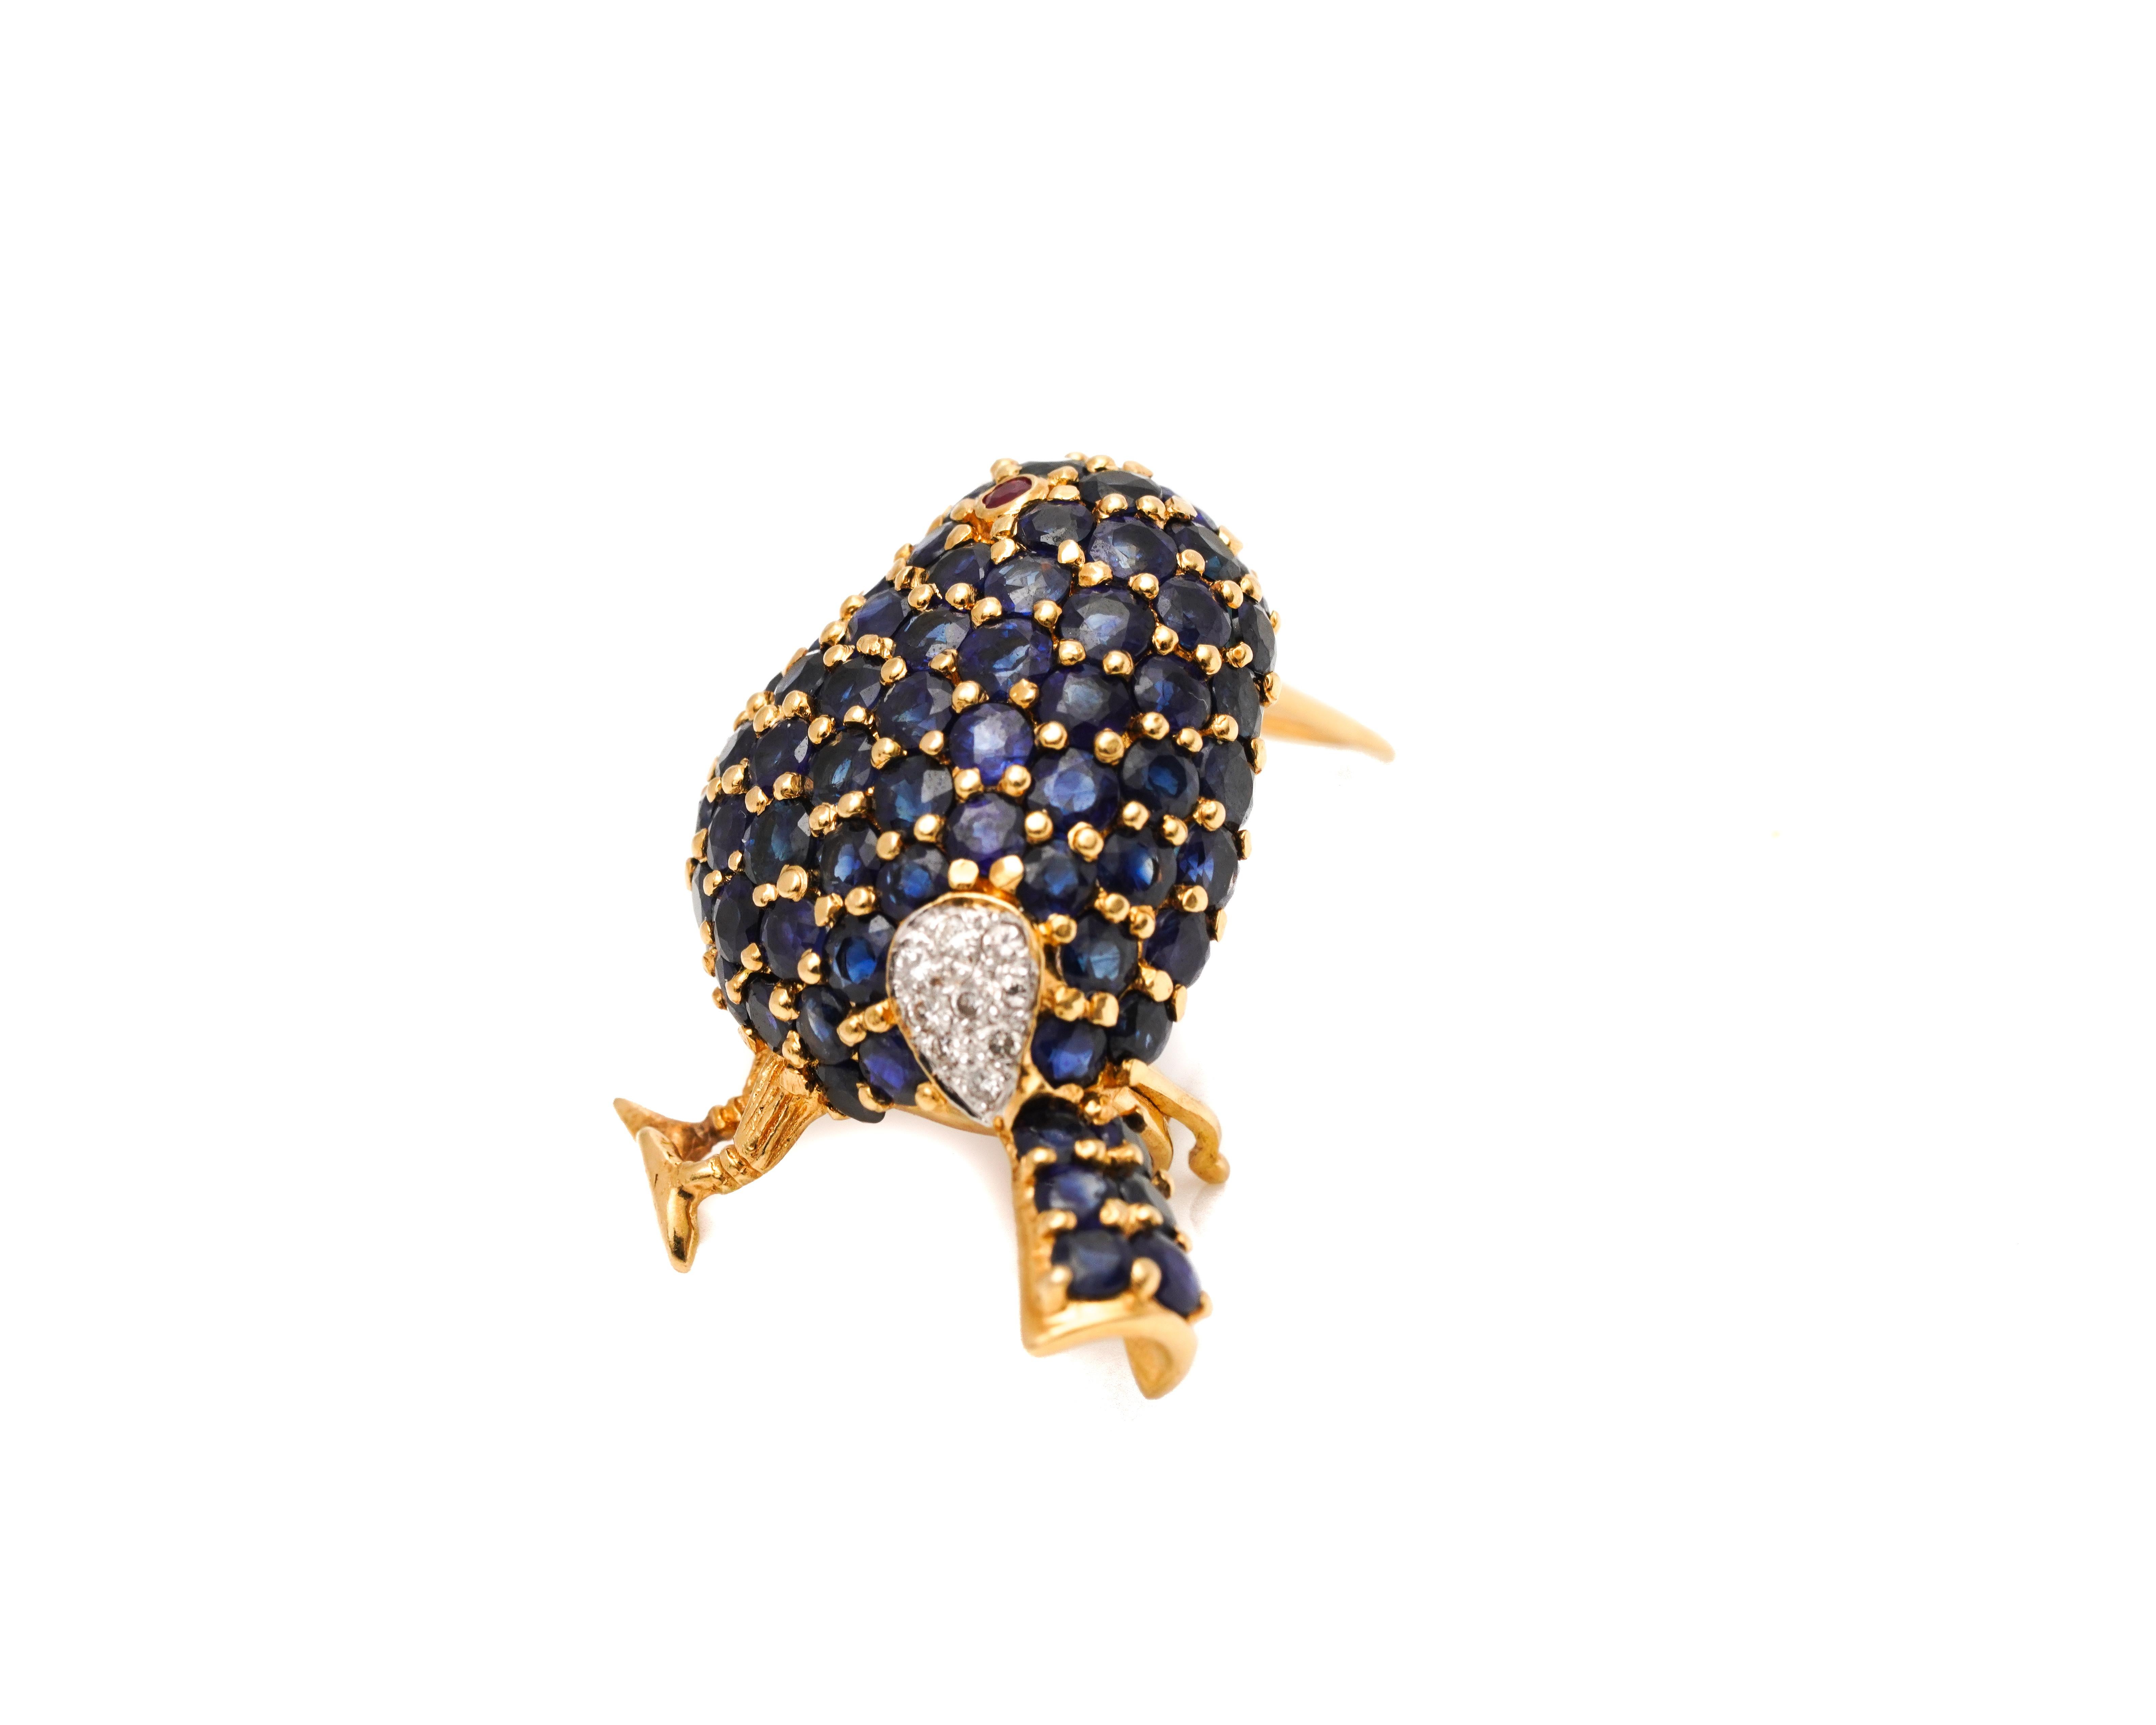 Retro 1950s 1 Carat Sapphire Bird with Ruby and Diamond Accents Pin Brooch